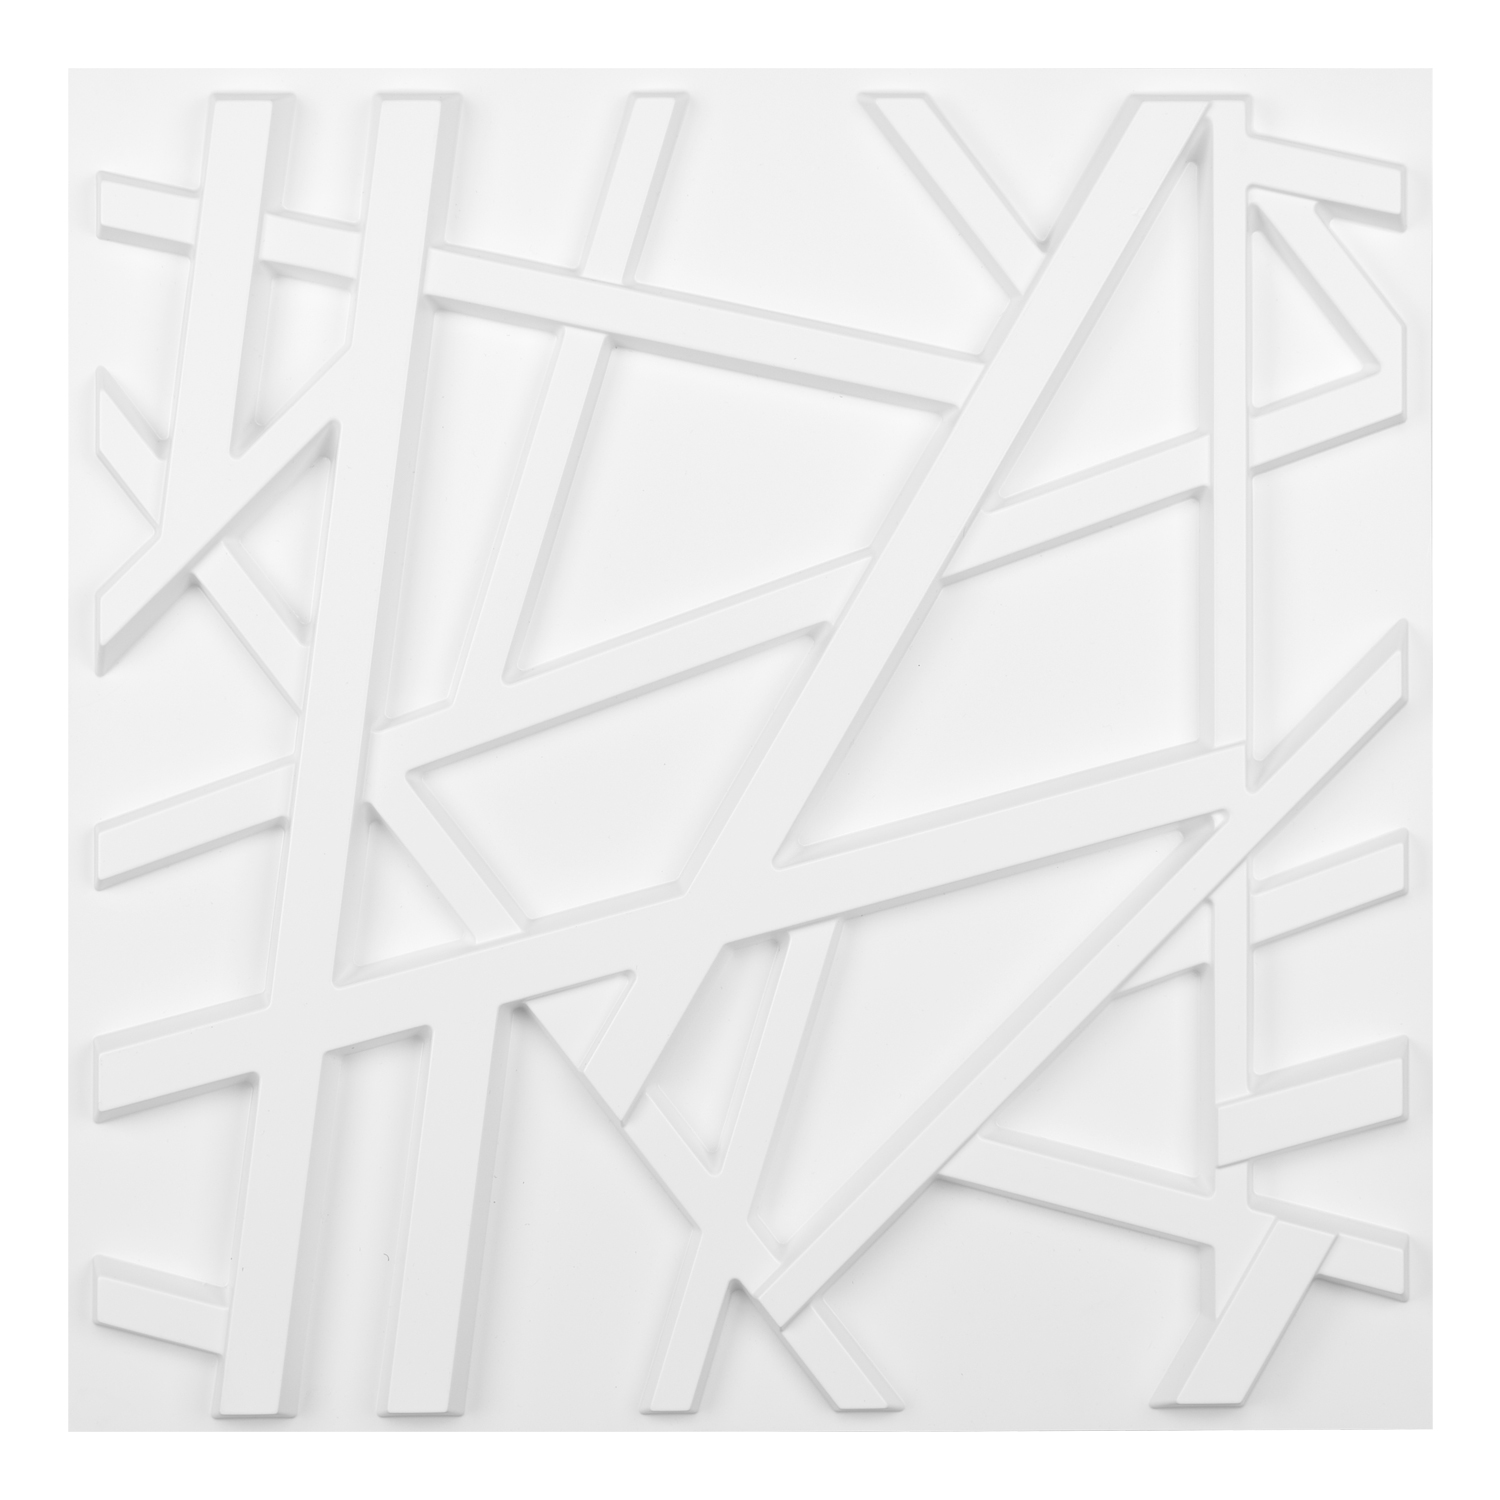 Matt White PVC 3D Wall Panel Geometric Crossing Lines Cover 32 Sqft, for Residential and Commercial Interior Decor